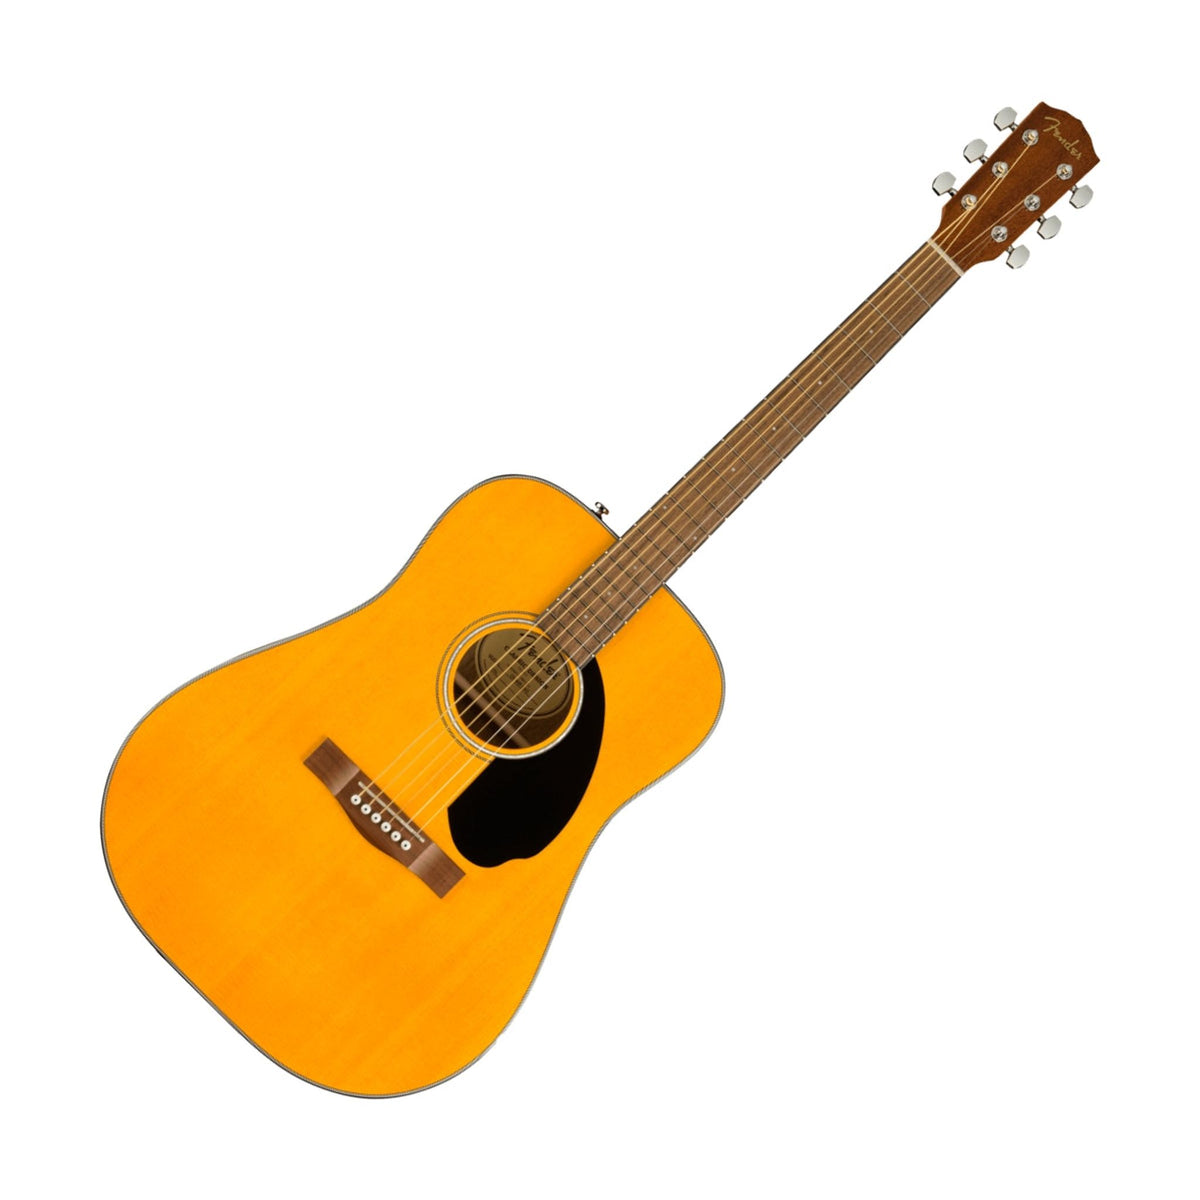 The Fender CD-60S is a very popular accoustic guitar and is ideal for players looking for a high-quality affordable dreadnought with great tone and excellent playability.